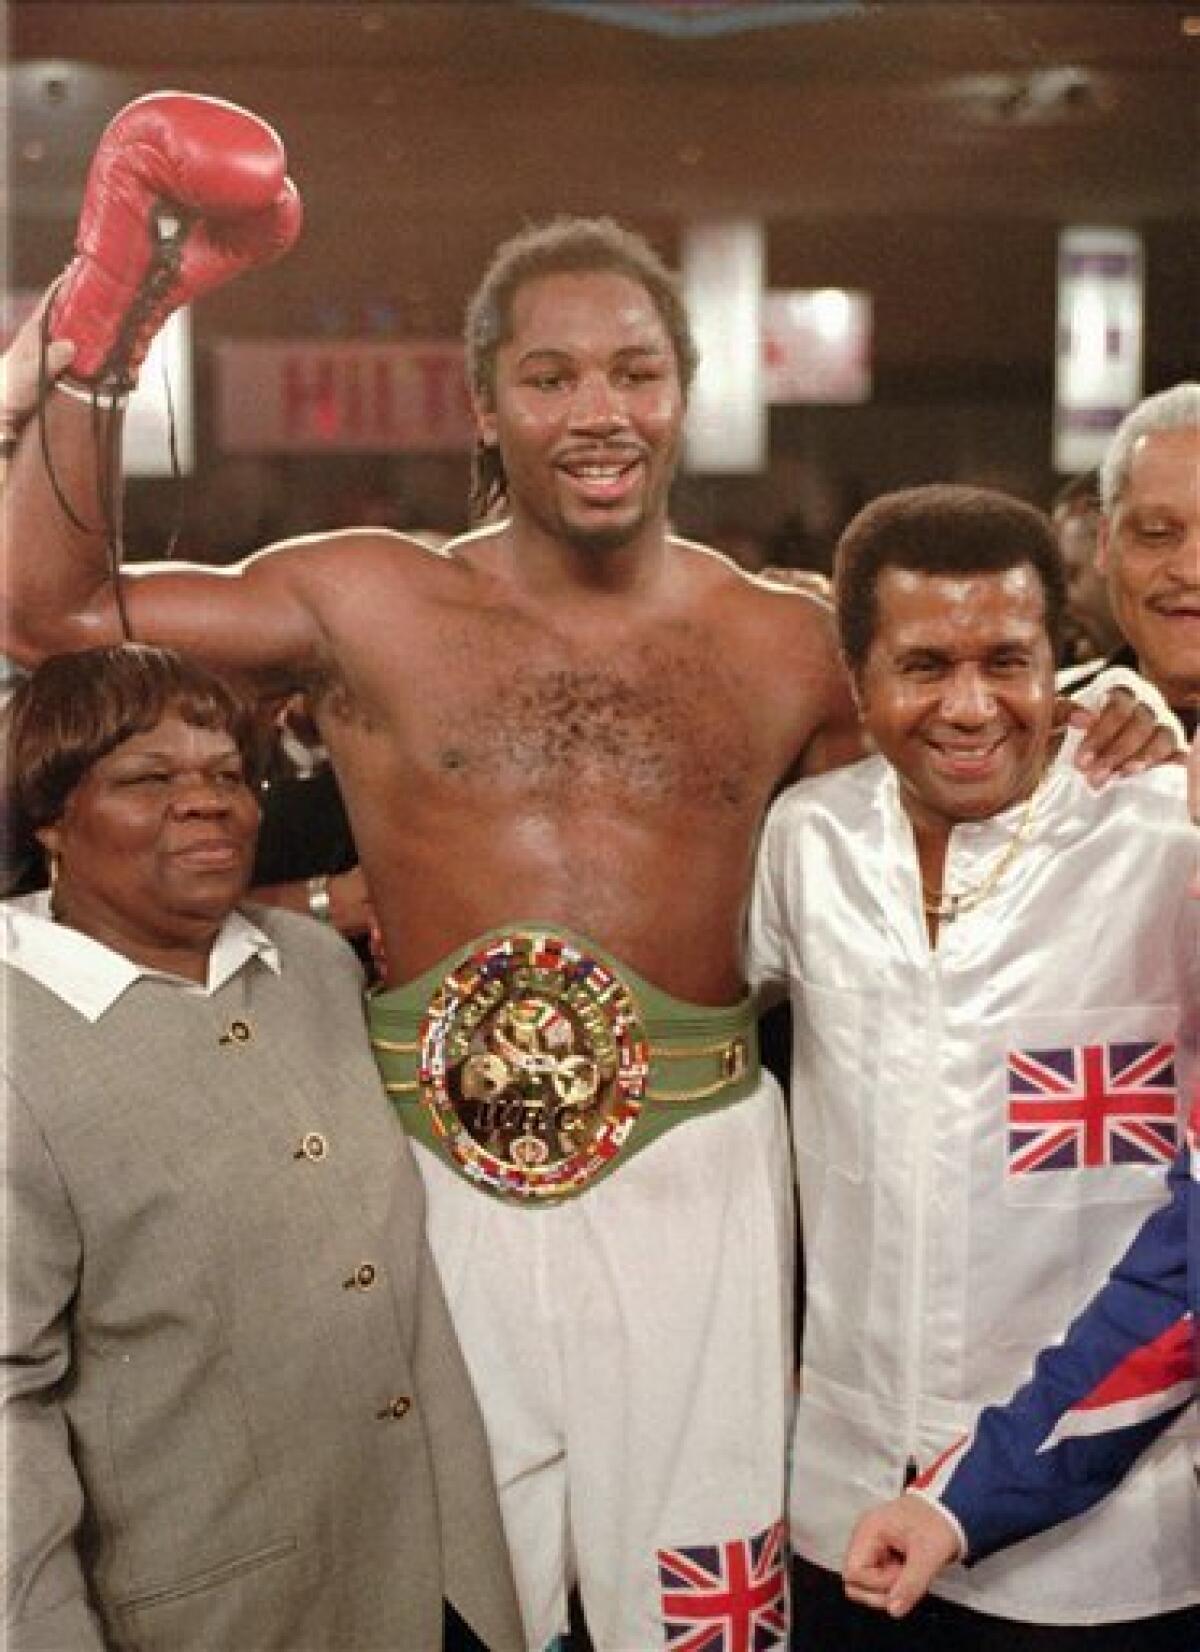 File-This Feb. 7, 1997 file photo shows newly crowned WBC heavyweight champion Lennox Lewis, center, reacting with his mother, left, and trainer Emanuel Steward after defeating Oliver McCall with a TKO in the fifth round at the Hilton Hotel in Las Vegas. teward, the owner of the legendary Kronk Gym and one of boxing's greatest trainers, has died. He was 68. Victoria Kirton, Steward's executive assistant, says Steward died Thursday Oct. 25, 2012 in a Chicago hospital. She did not disclose the cause of death. (AP Photo/Jeff Scheid, File)